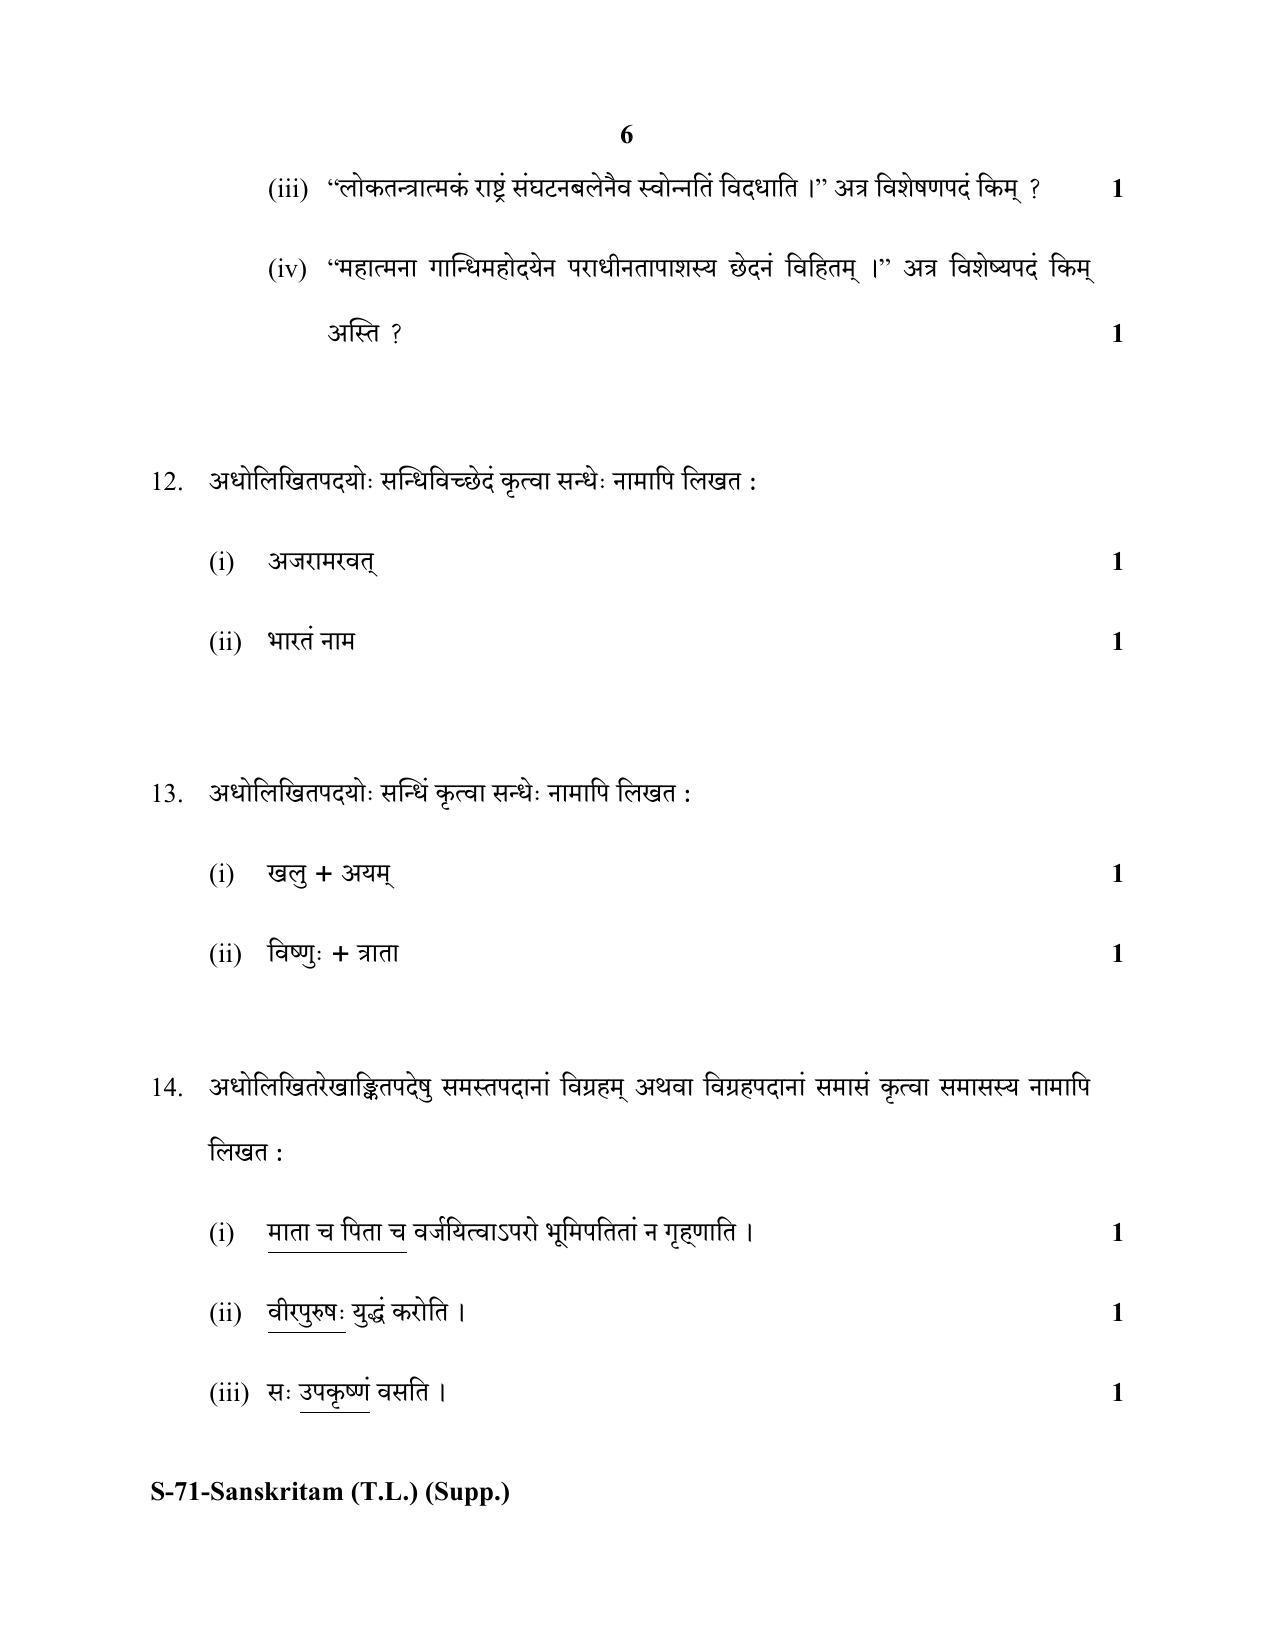 RBSE Class 10 Sanskrit TL Supplementary 2020 Question Paper - Page 6